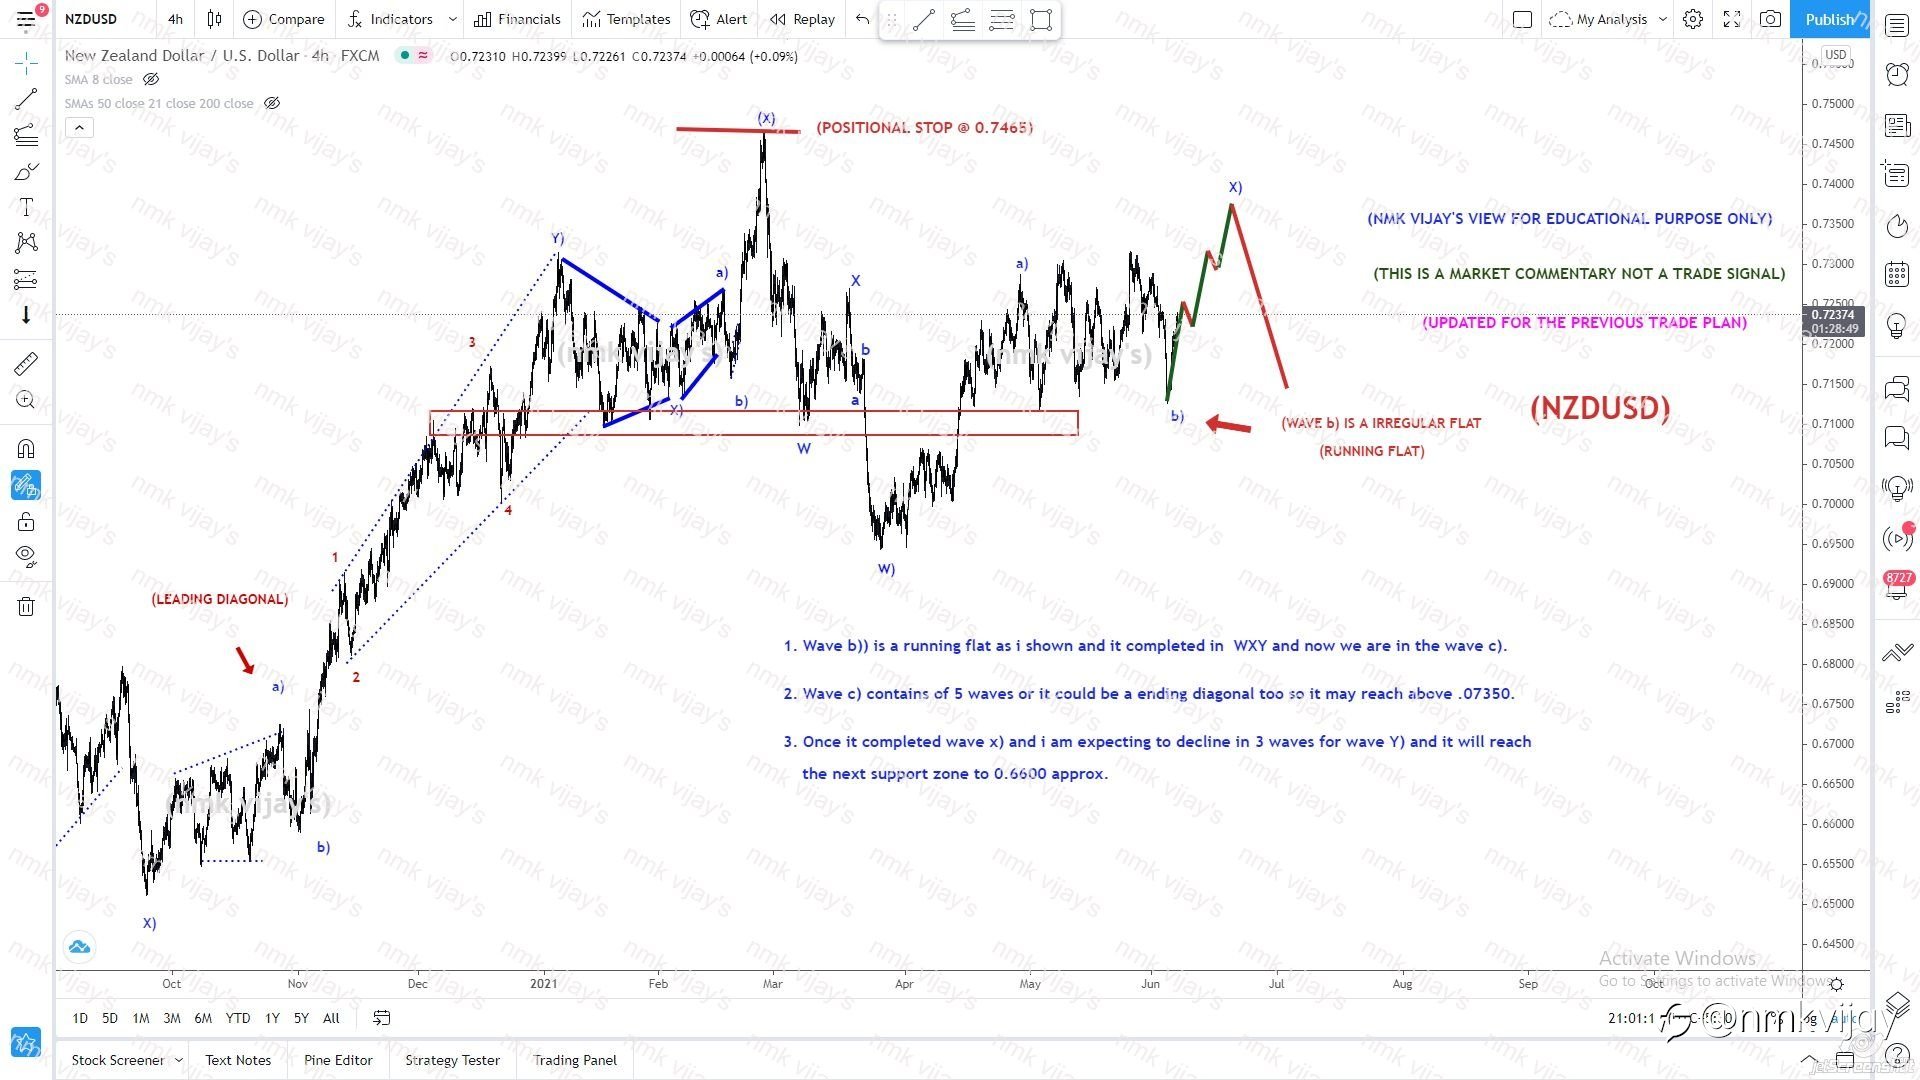 NZDUSD-Will C) wave may complete @ 0.7350 to complete wave X)?